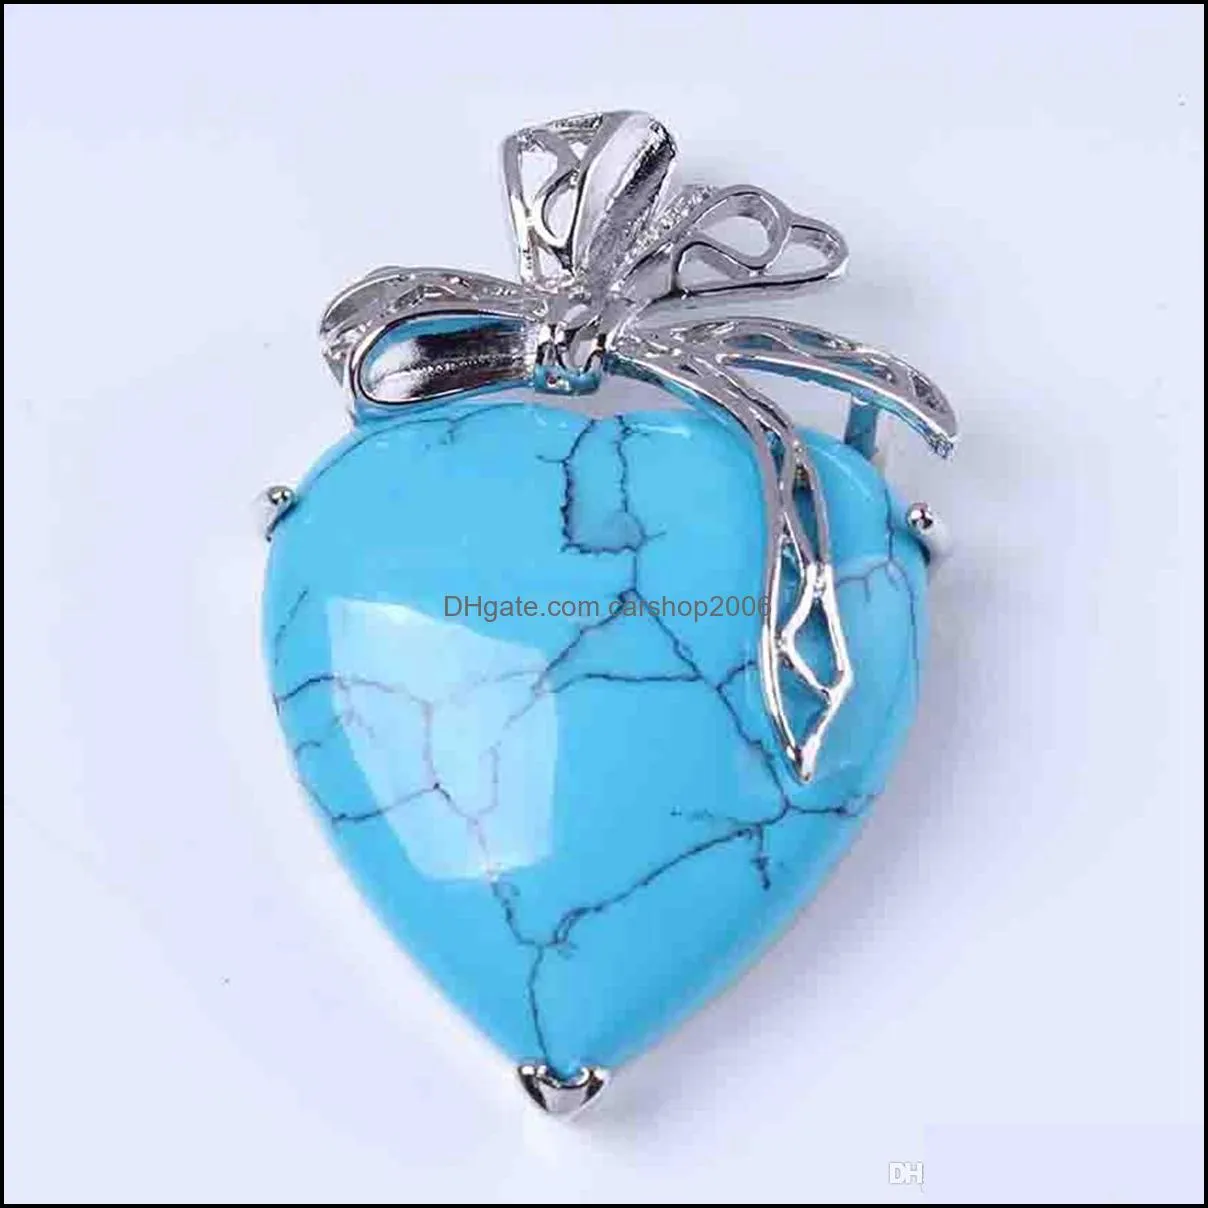 Necklaces & Pendants Jewelryheart-Shaped Pendant Ladies Elegant Temperament Necklace Wild Jewelry Stainless Steel Drop Delivery 2021 Zs1L8